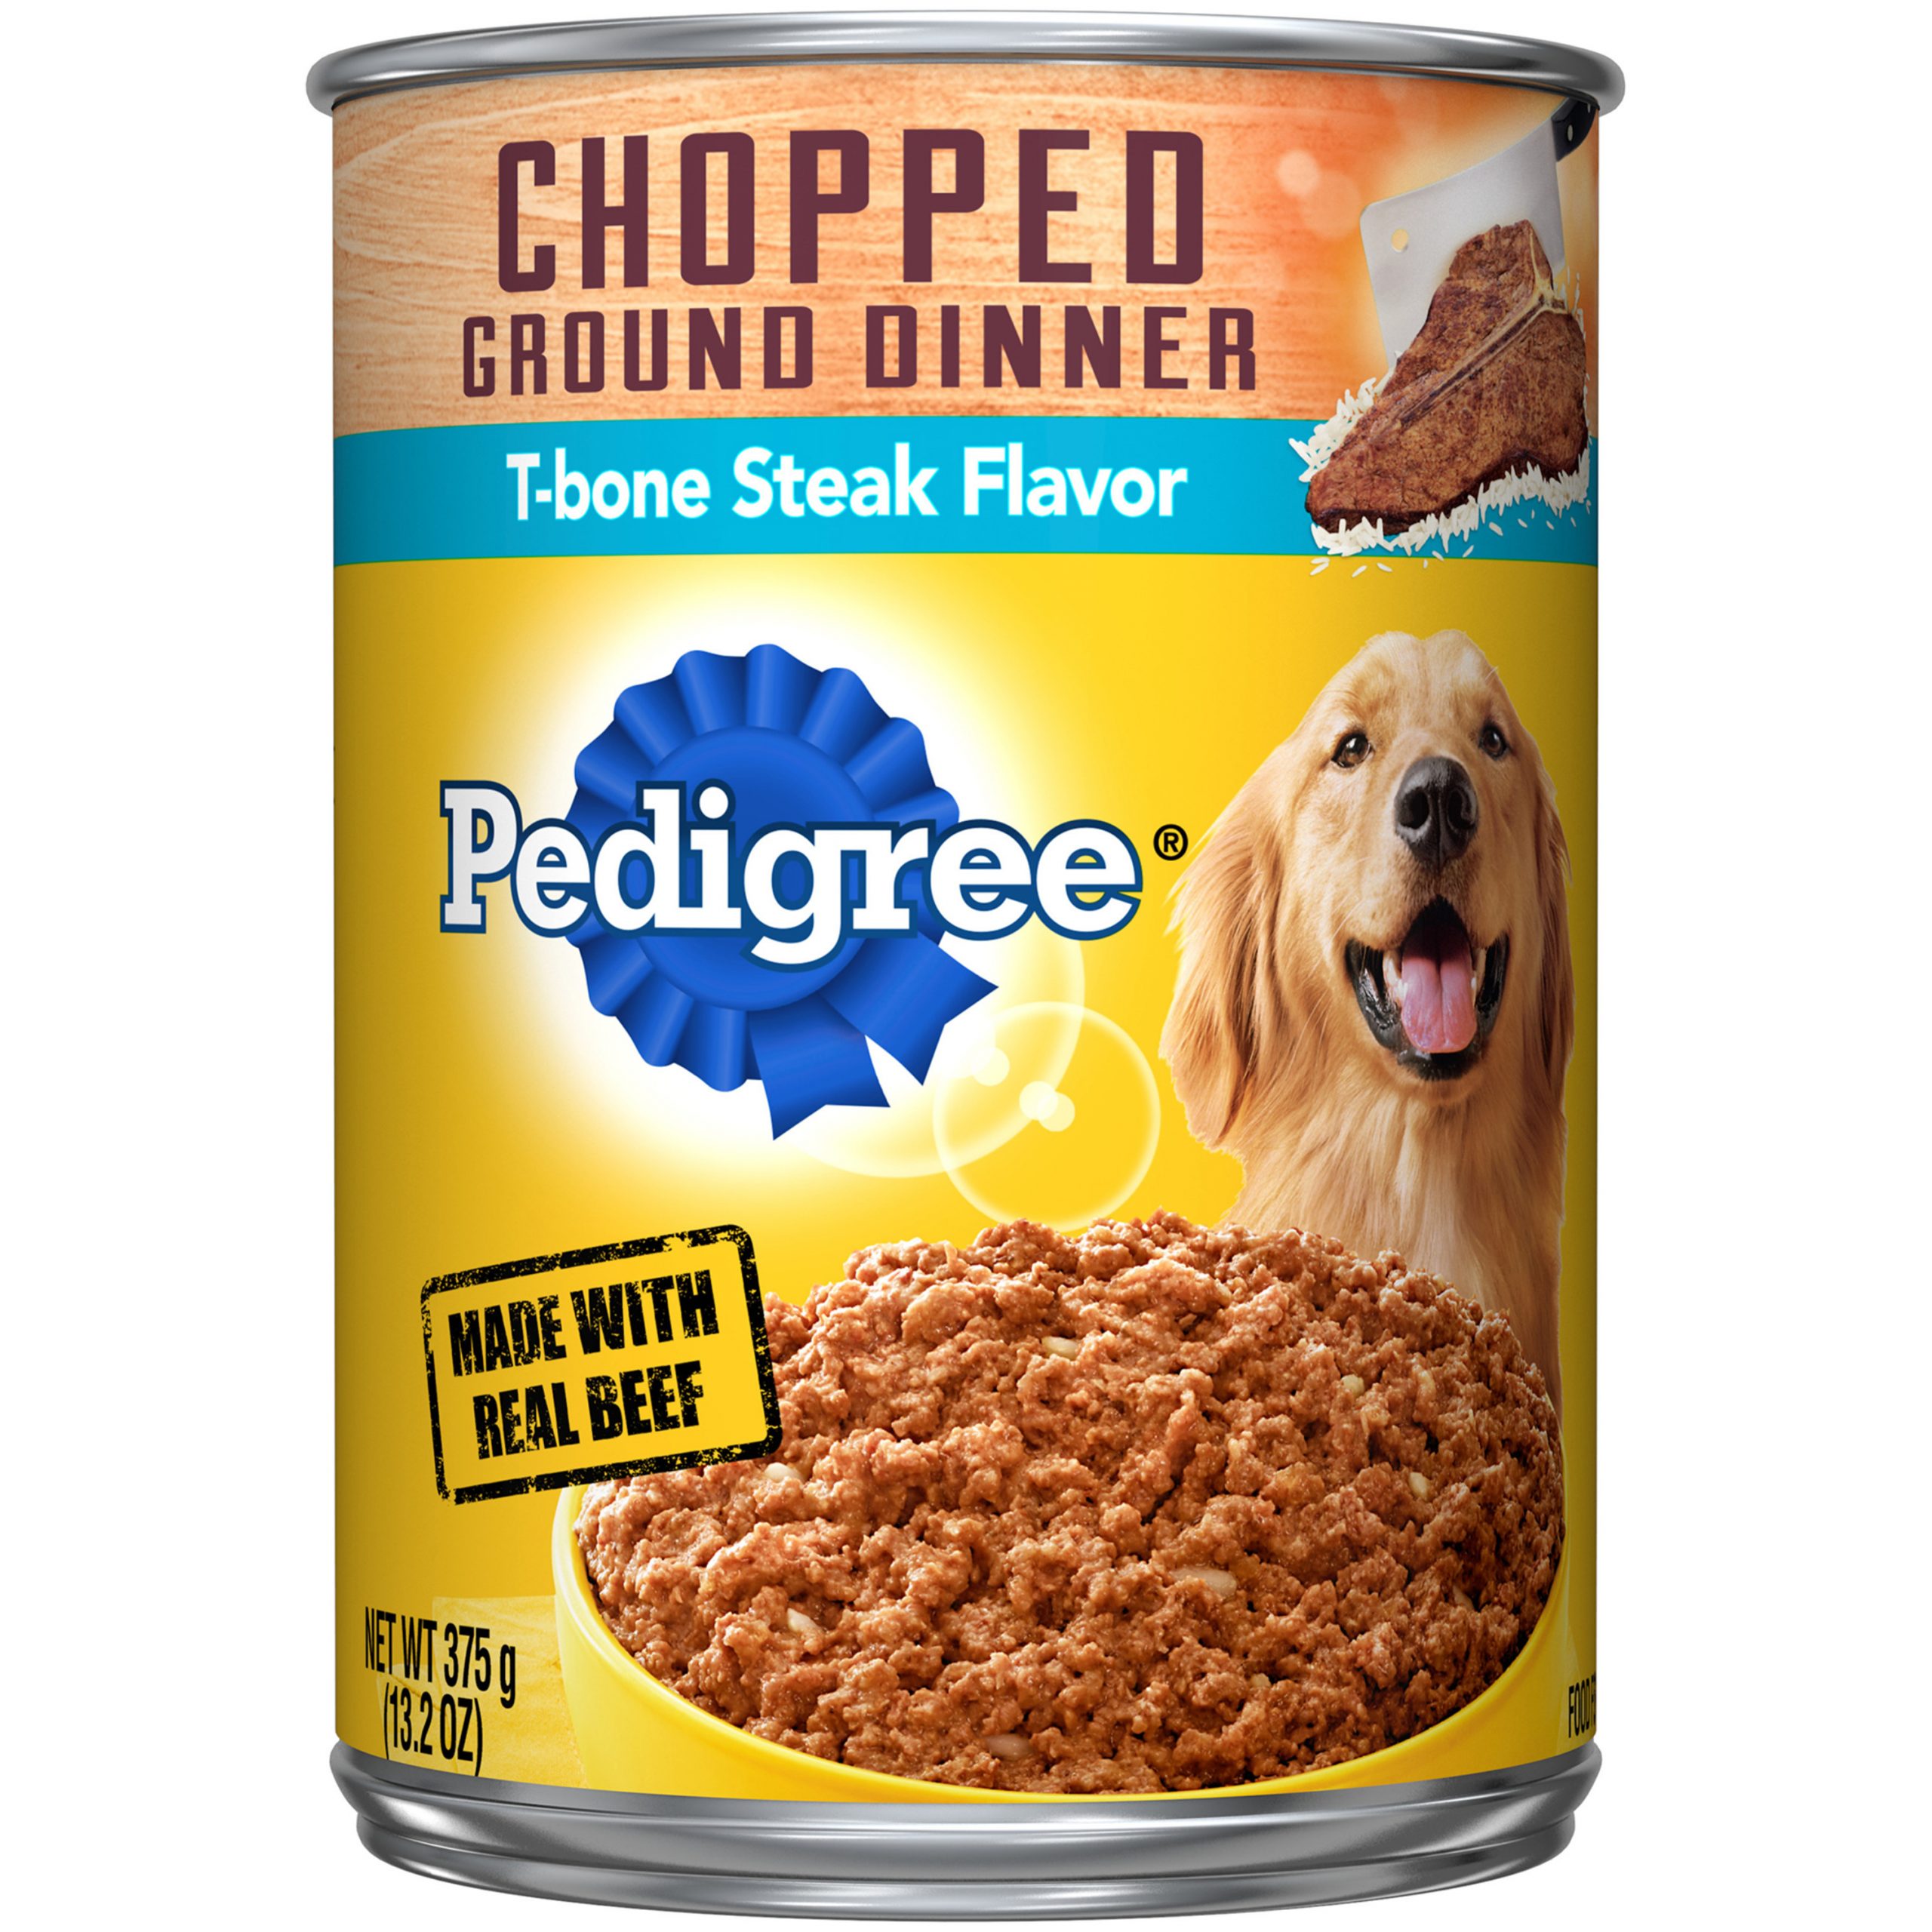 Pedigree Chopped Ground Dinner Canned Wet Dog Food T